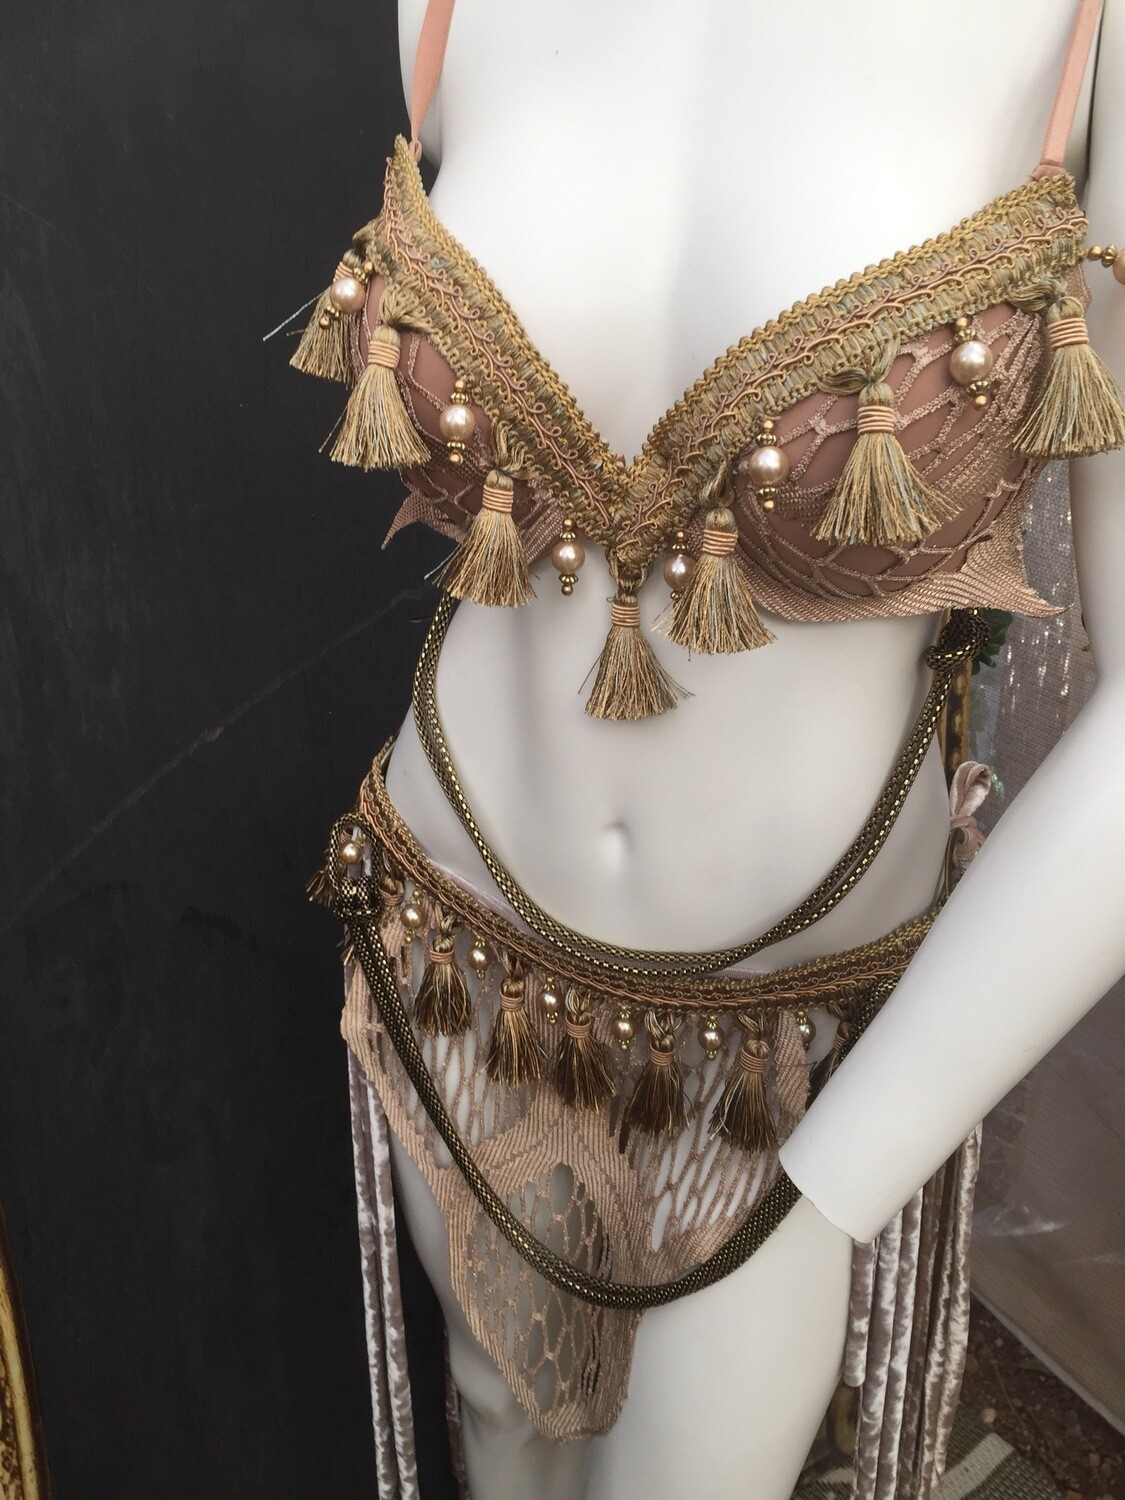 Champagne Mist Bra 36 C Pearly Trim W Metal Braid Swagg Two Hip Wraps Front And Back